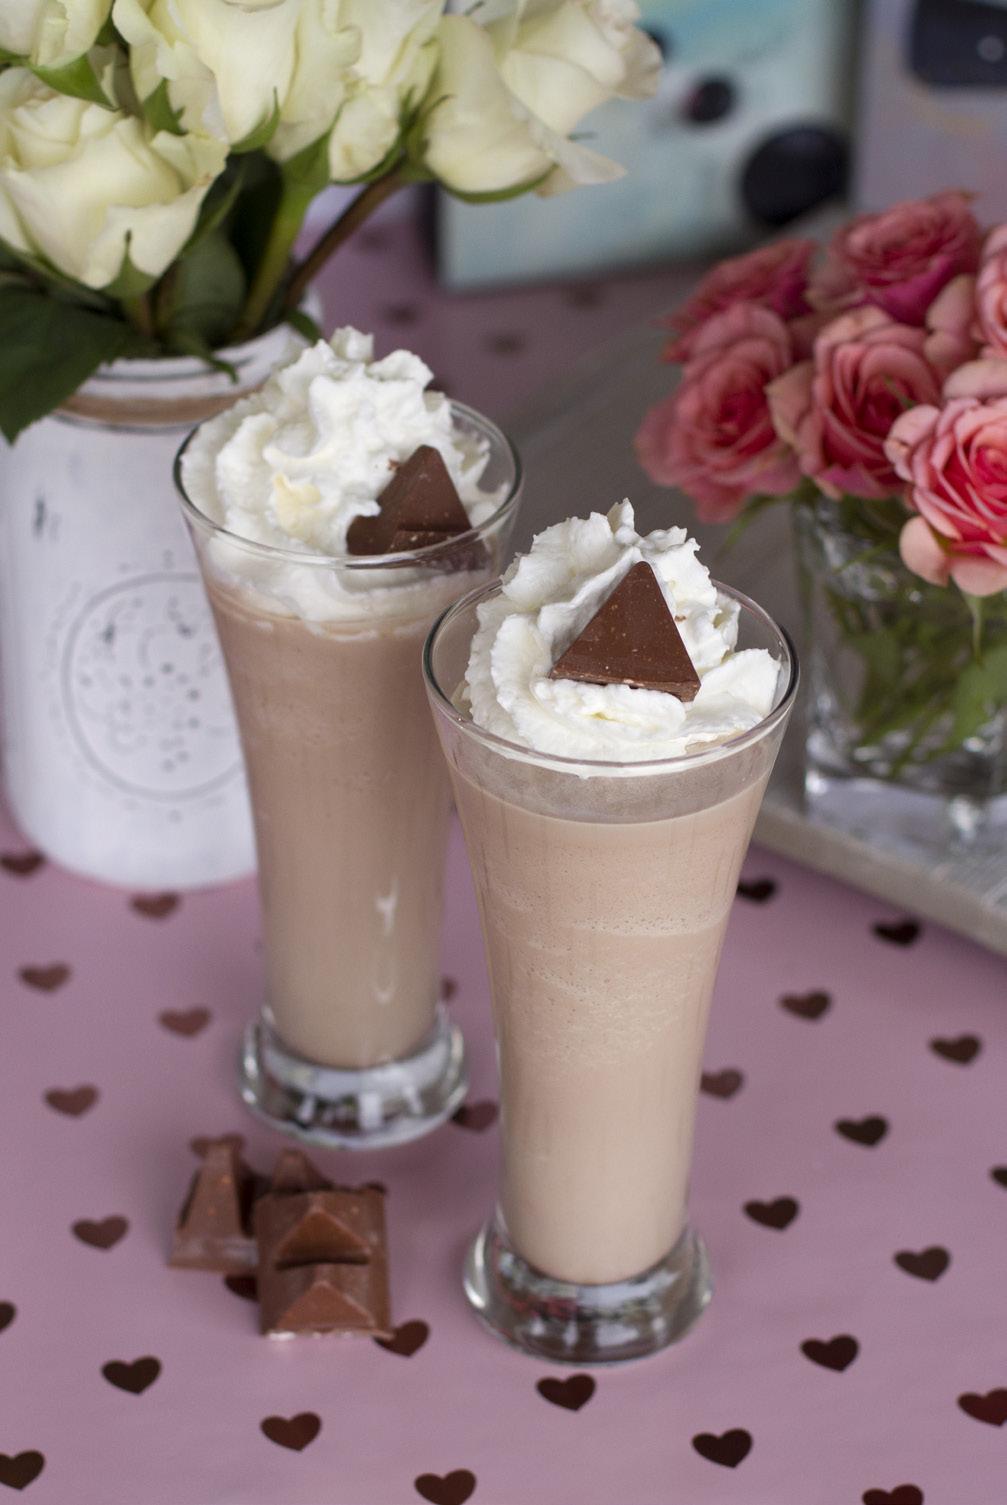 Tip-Top Toffee Frappé There are many options for a special occasion sweet, but to me the triangular segments of Toblerone that break apart so perfectly make it one of the best candy bars for sharing.